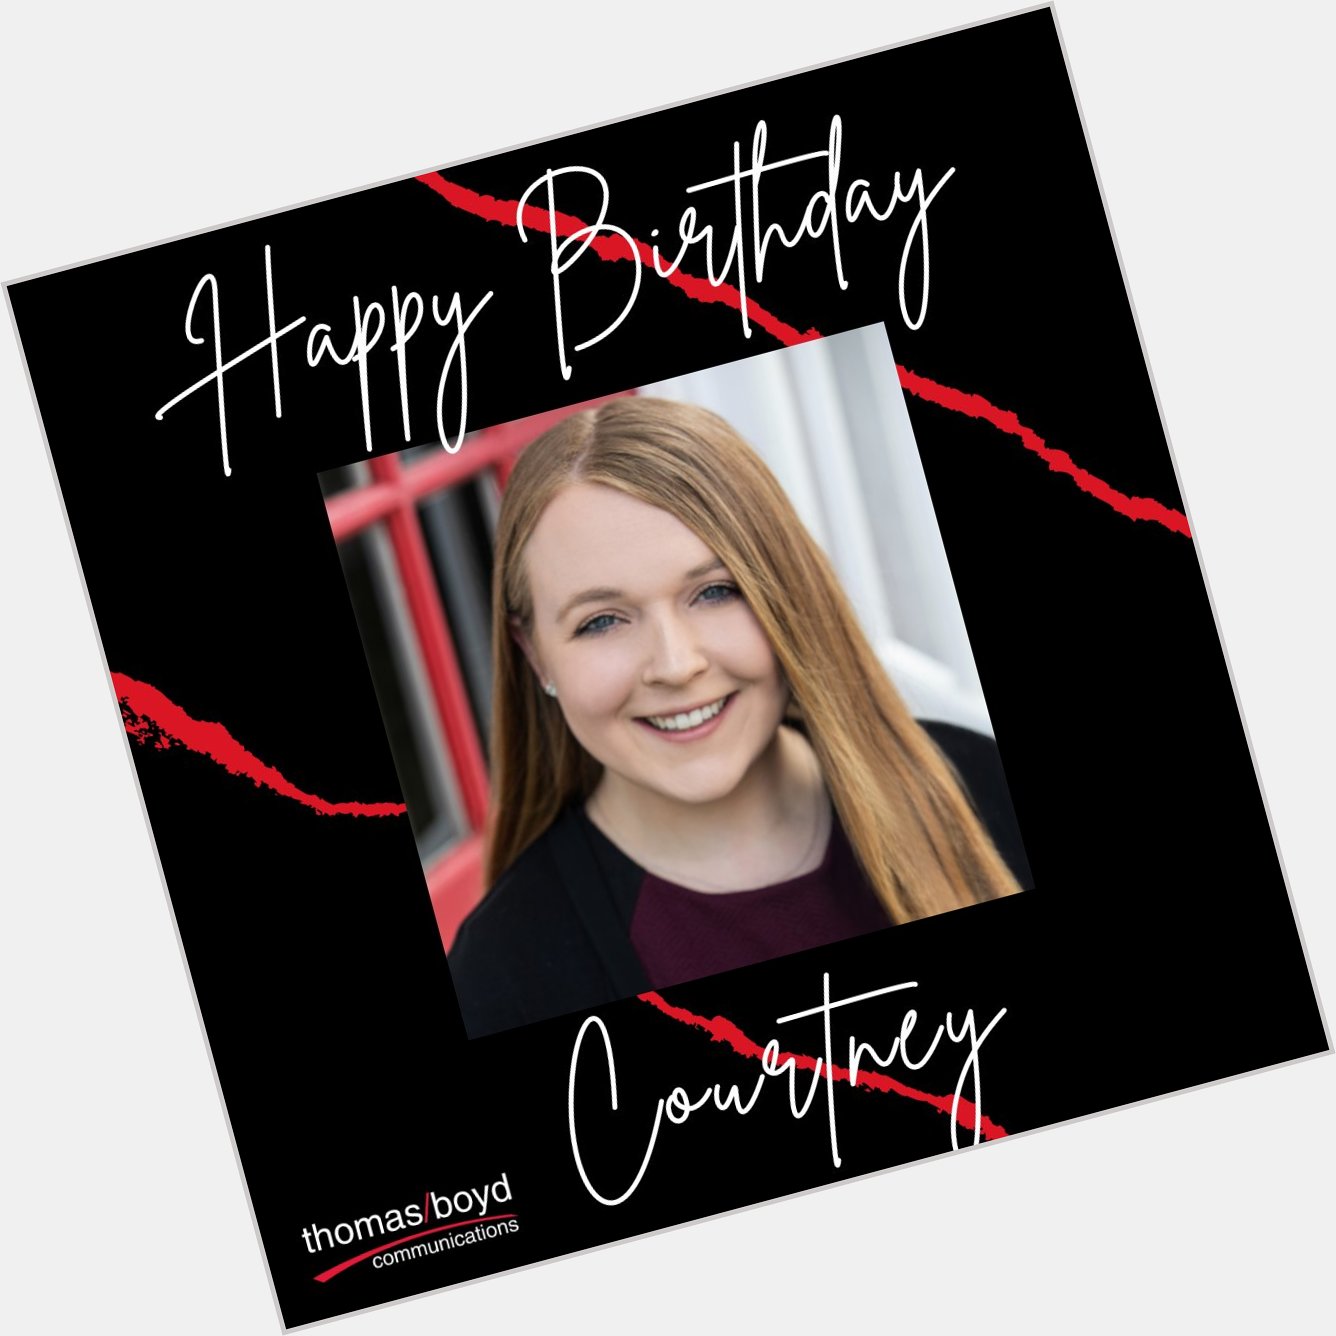 Wishing a very Happy Birthday to TBC s Courtney Miller-- we hope you enjoy your special day!  